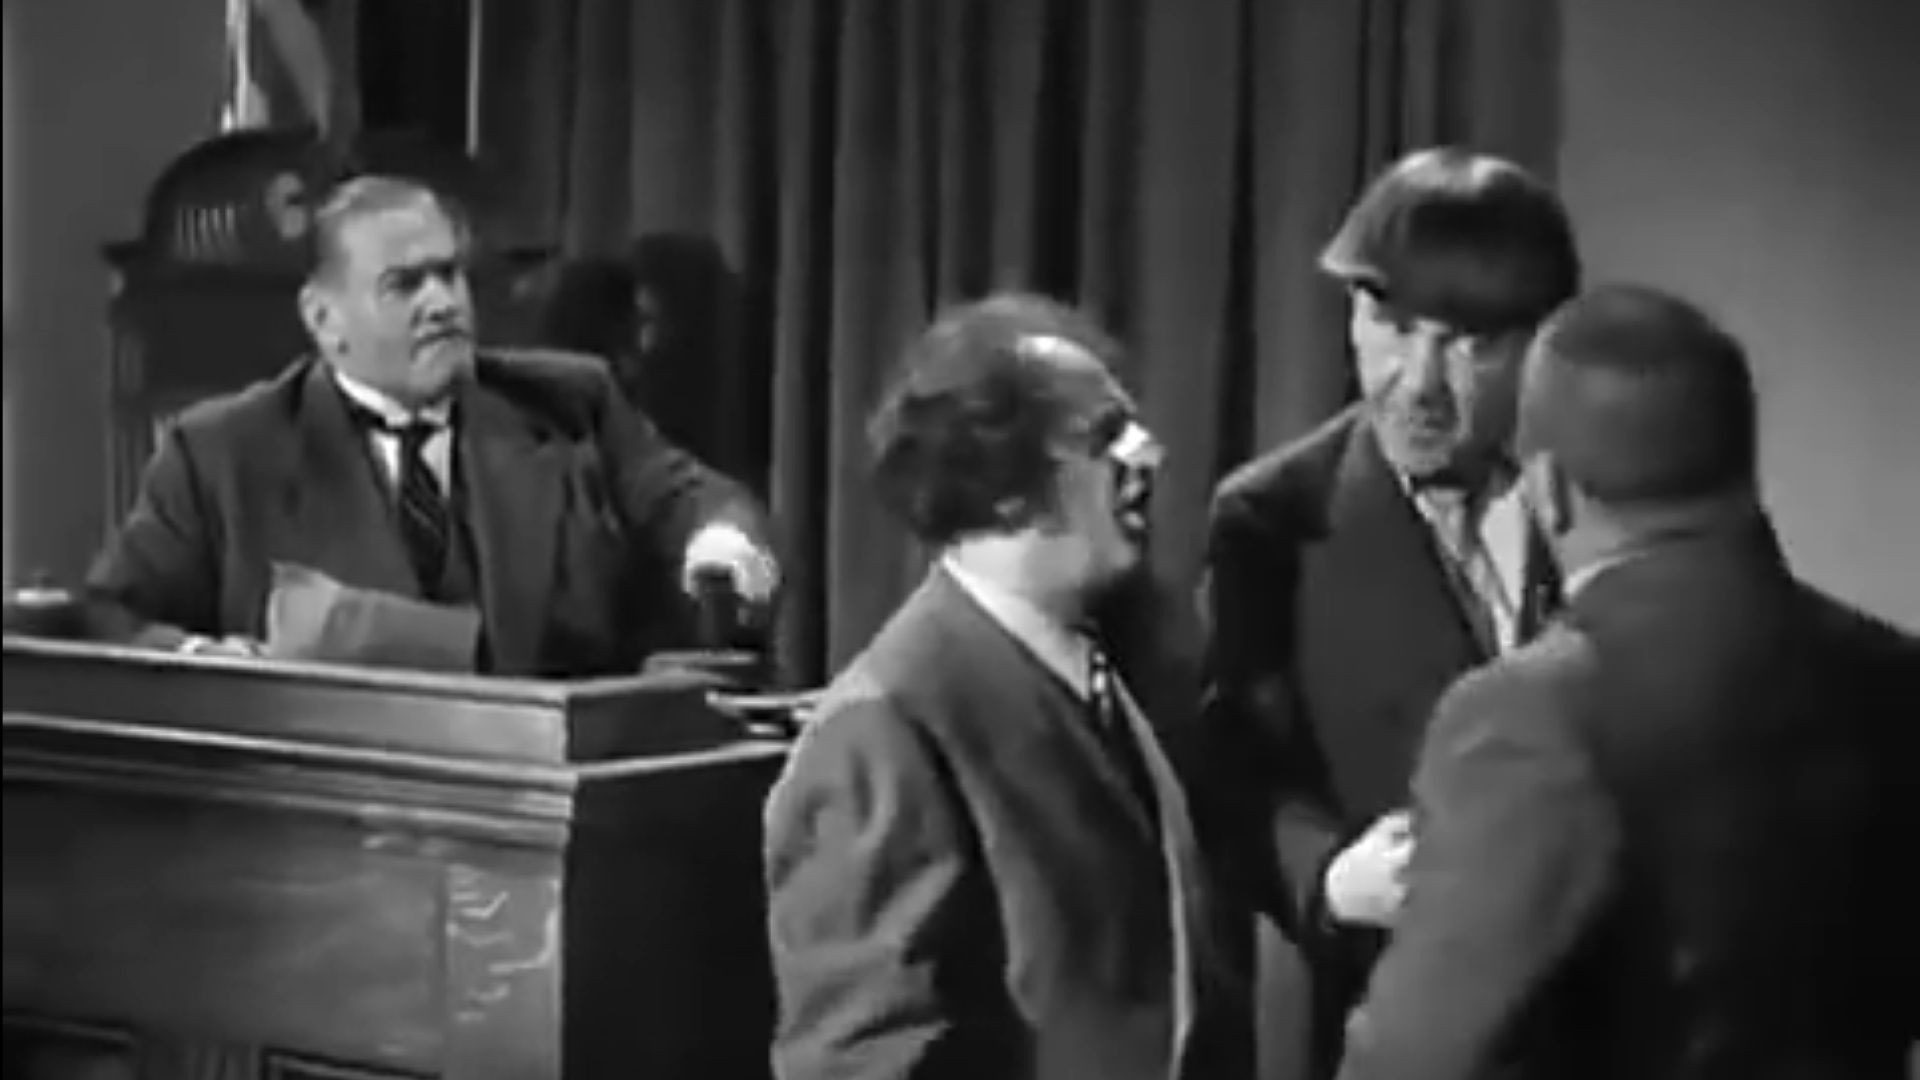 The Three Stooges Full Episodes Compilation Curly, Larry, Moe Da Baron - 1940